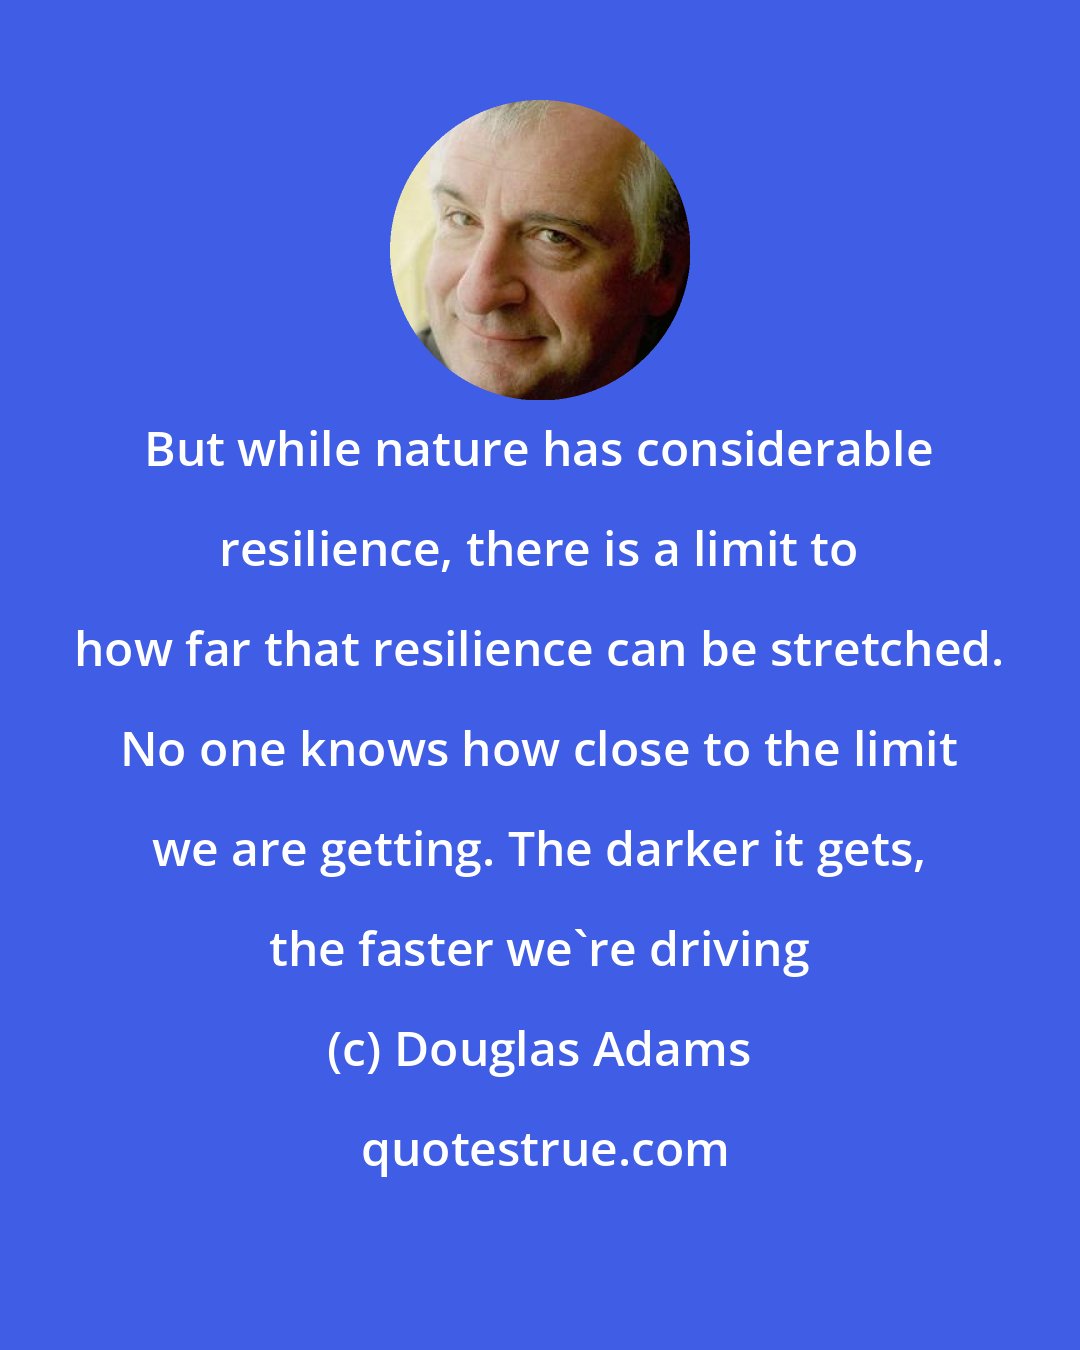 Douglas Adams: But while nature has considerable resilience, there is a limit to how far that resilience can be stretched. No one knows how close to the limit we are getting. The darker it gets, the faster we're driving